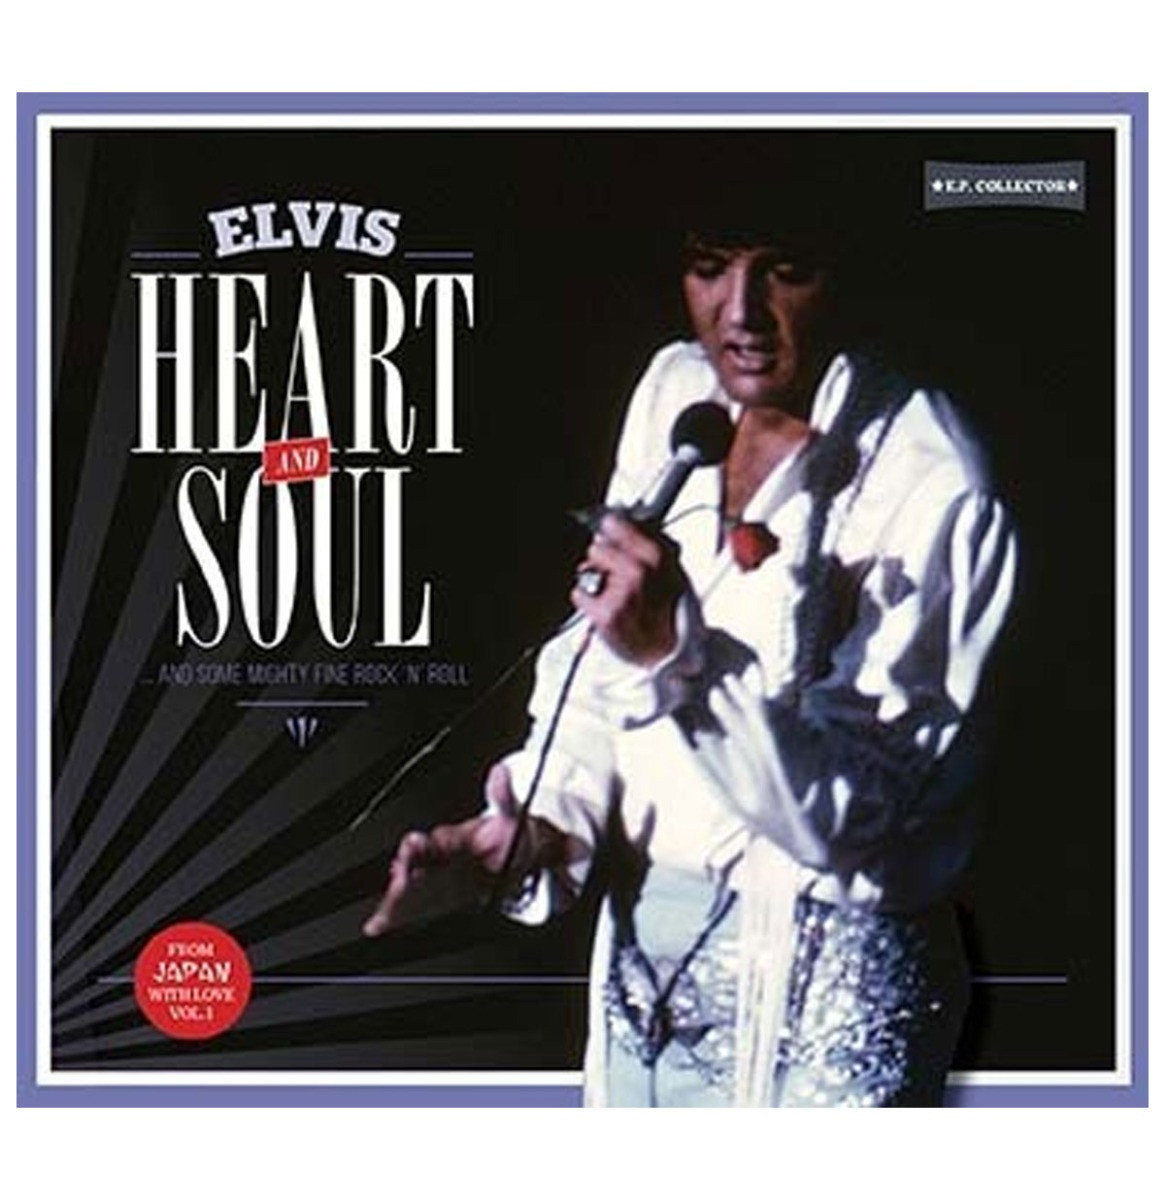 Elvis Presley: Heart And Soul CD - From Japan With Love Vol. 1